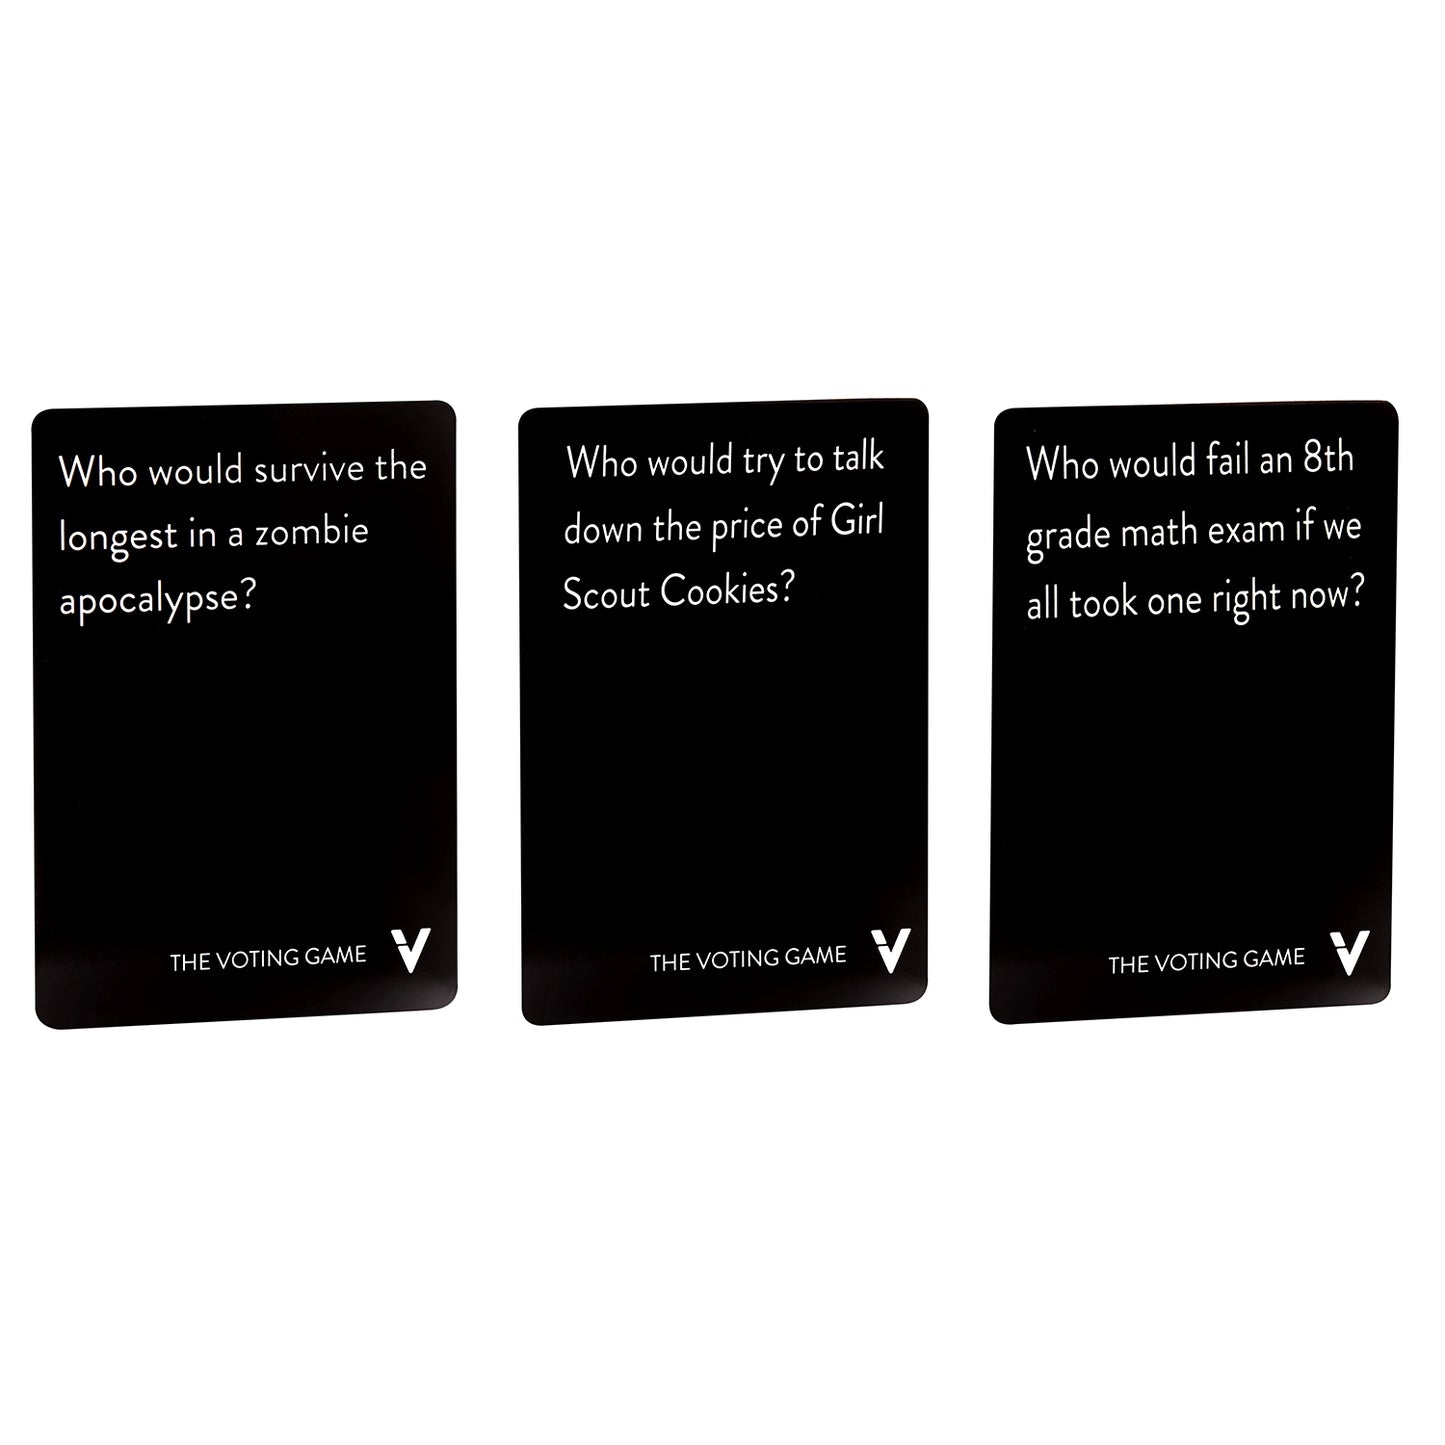 The Voting Game: The Adult Party Game About Your Friends